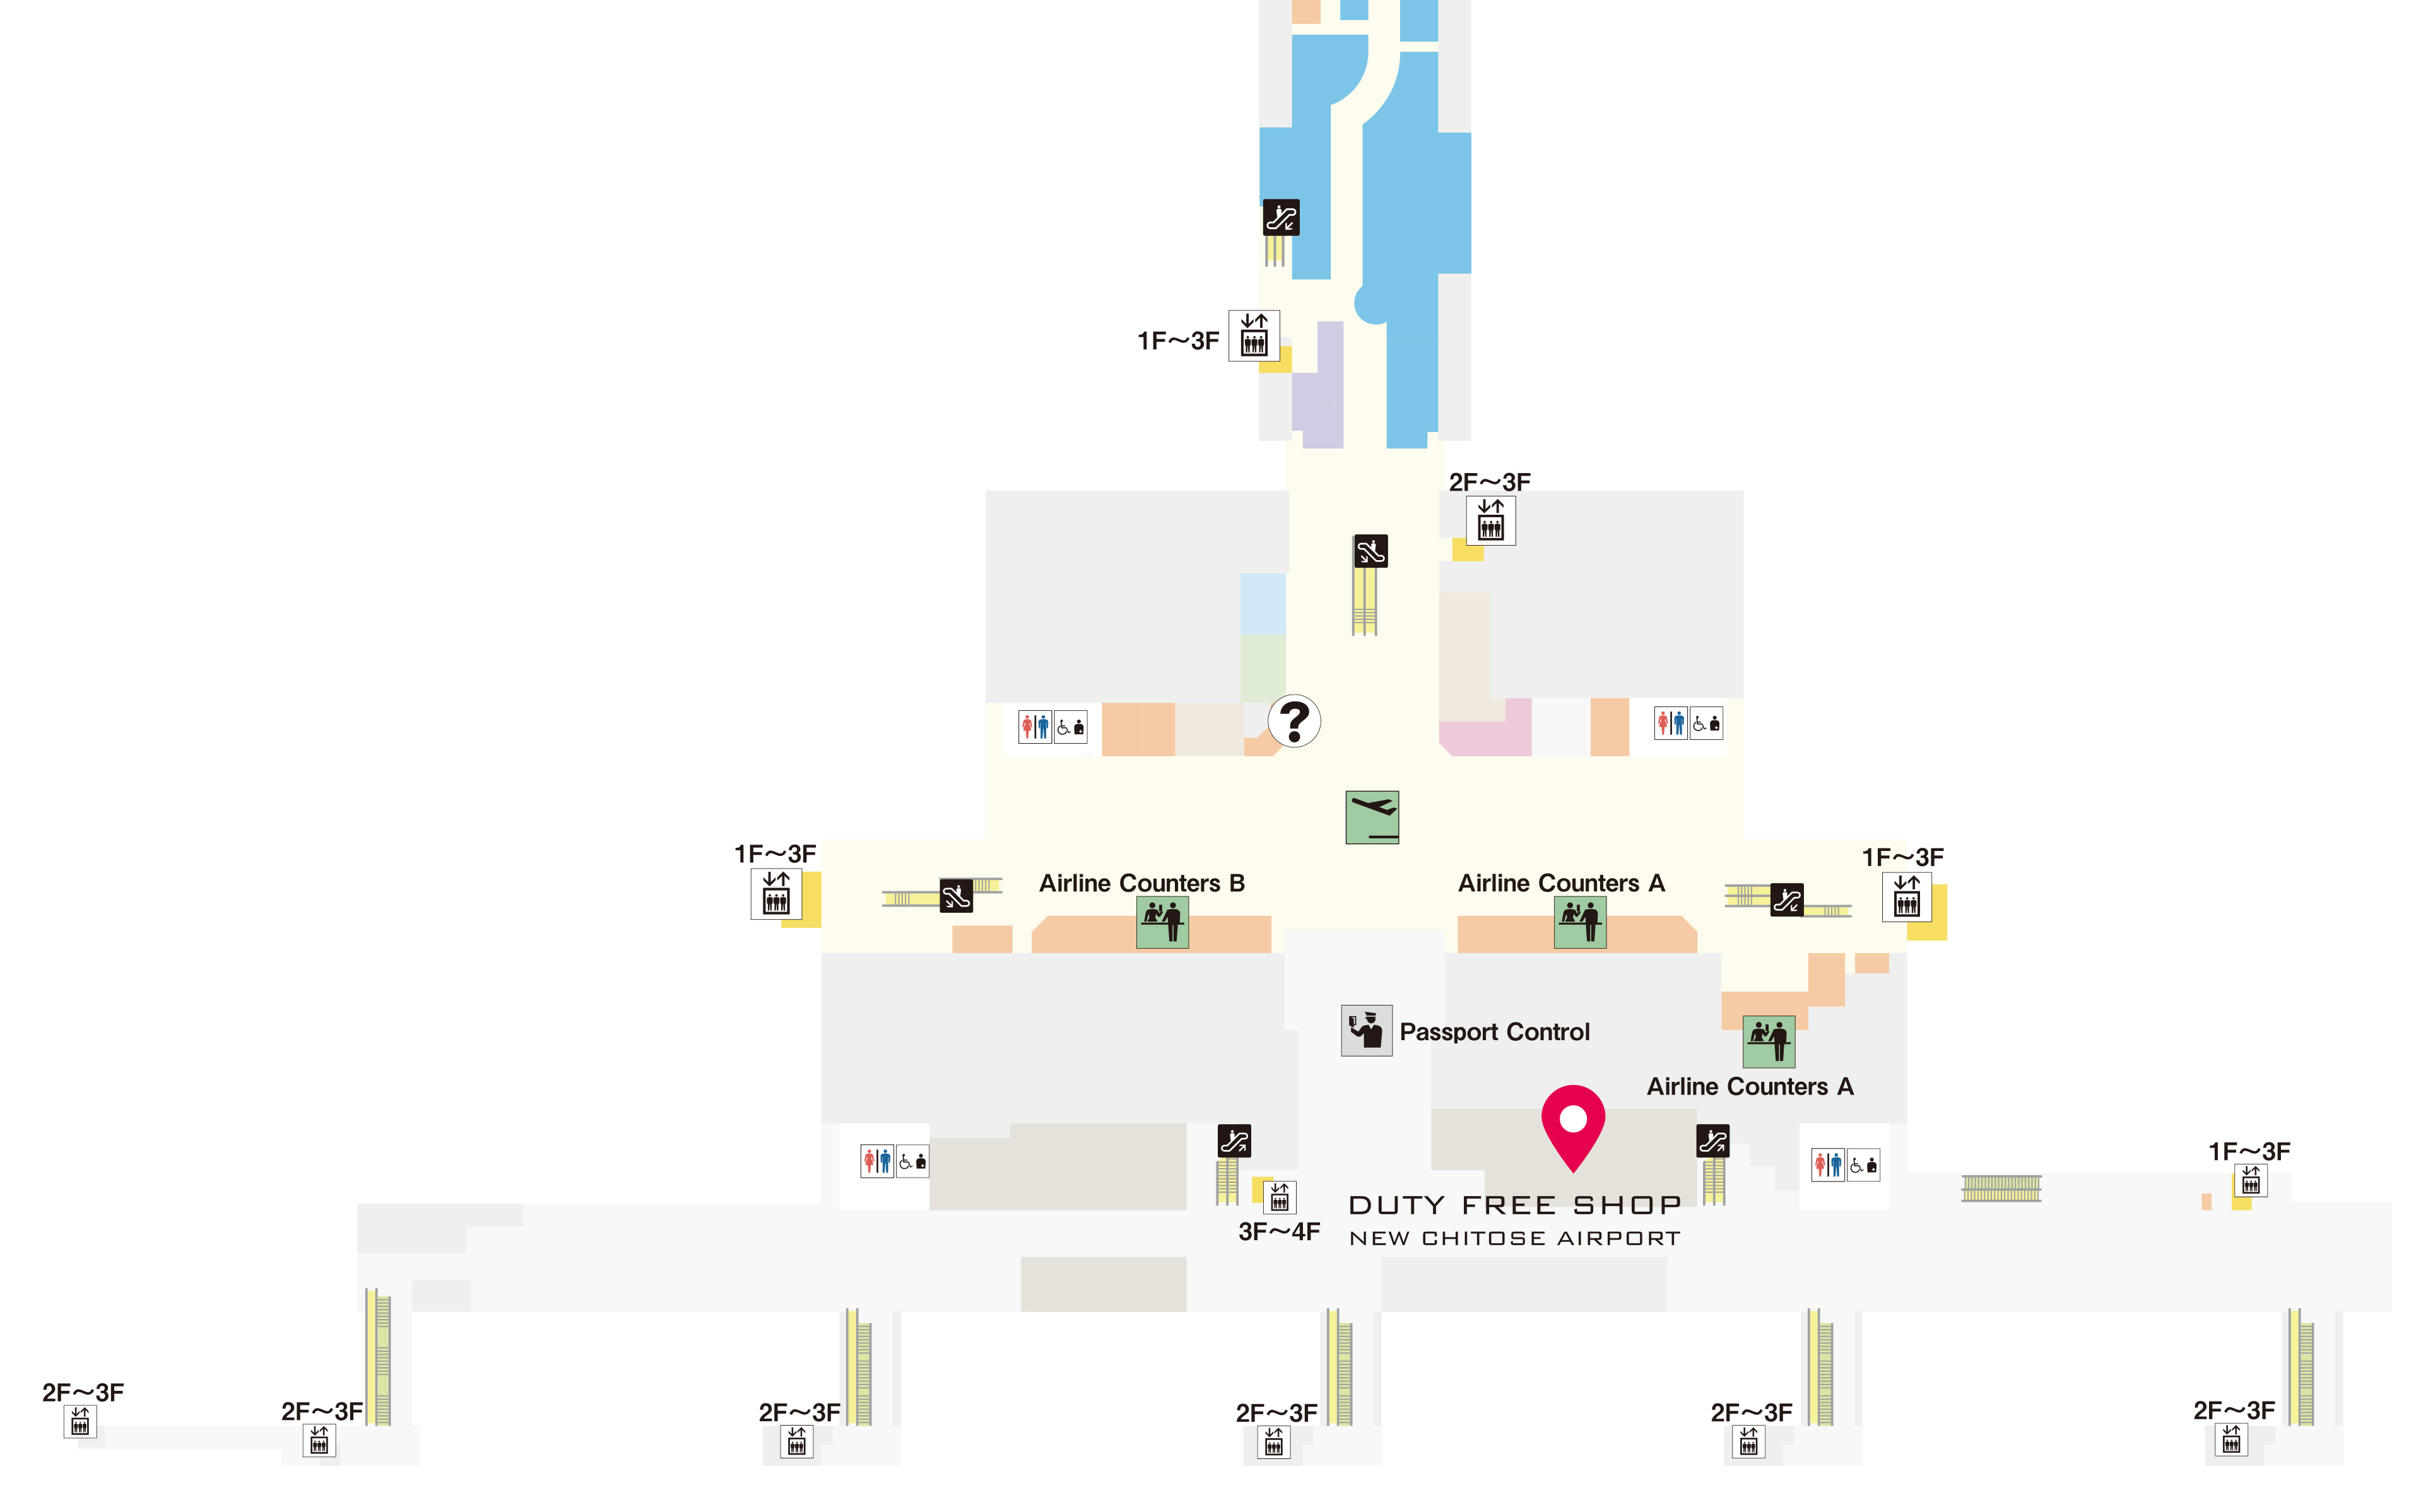 General shop Map of the airport